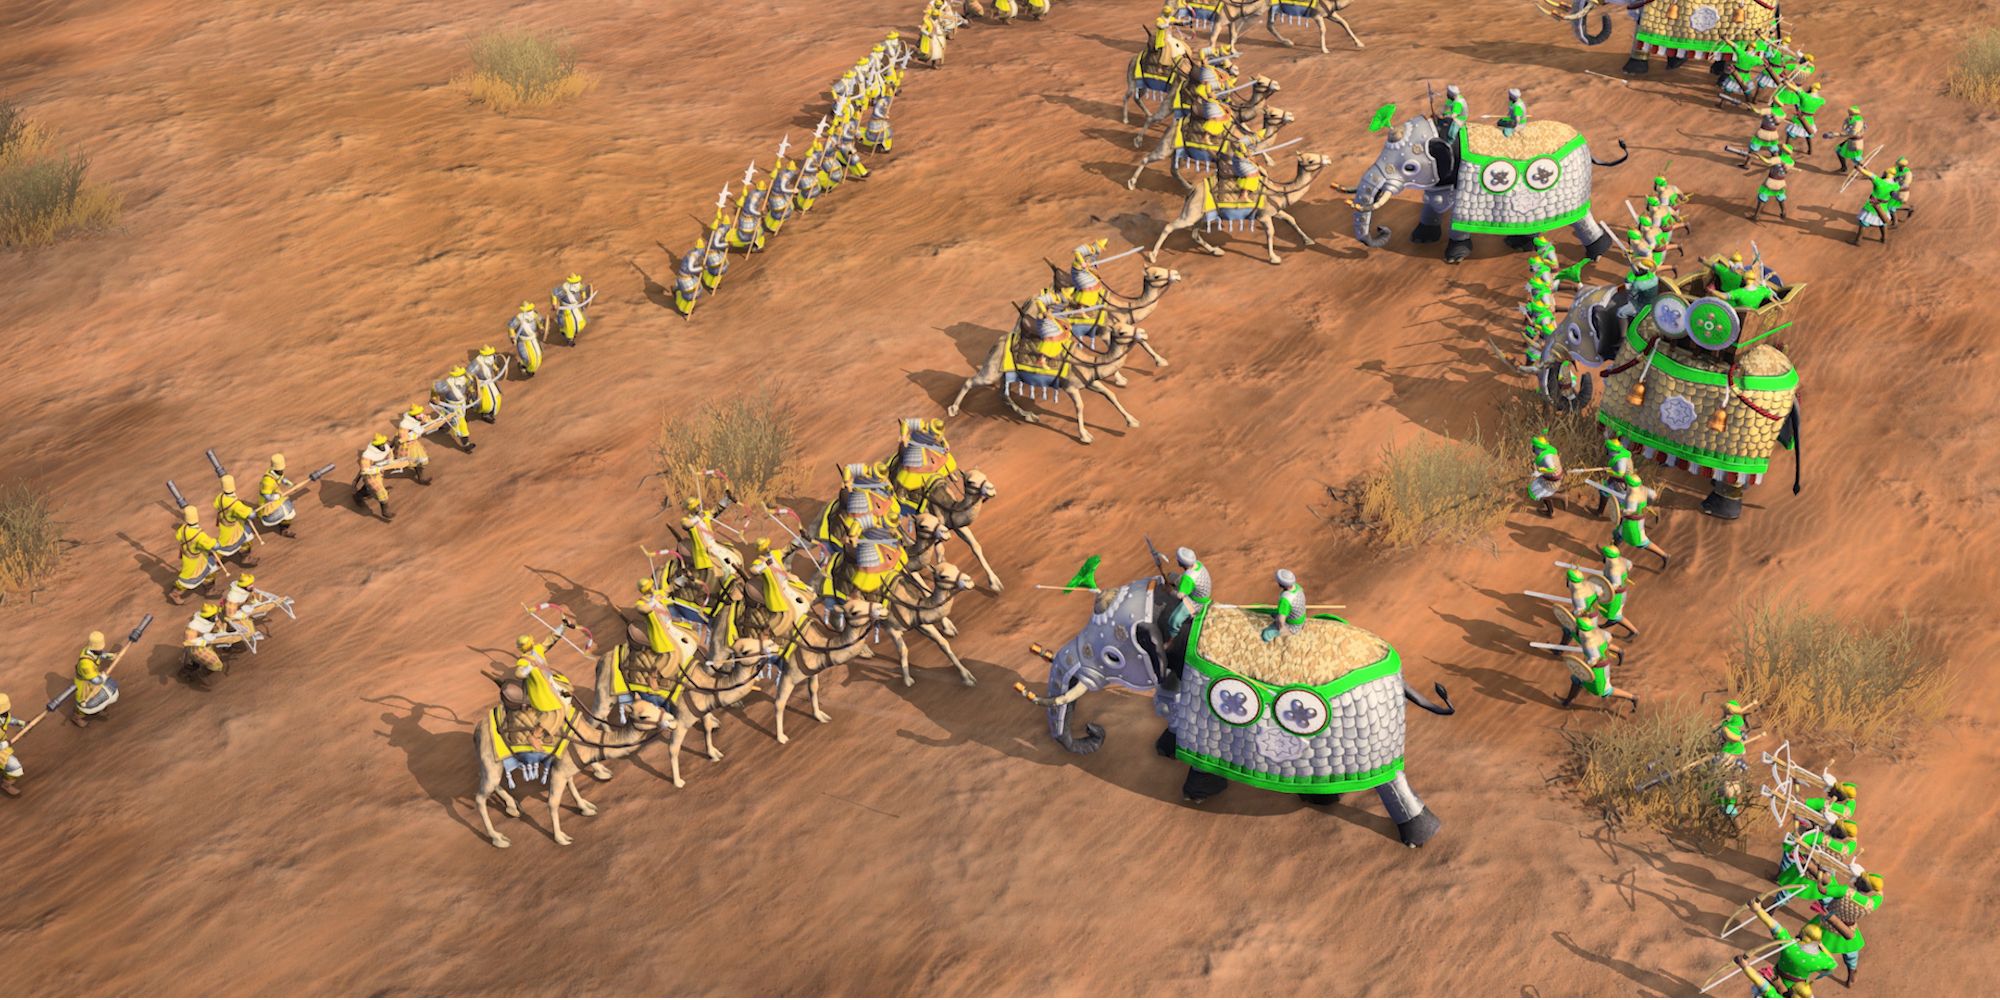 Great PvE Games - Age of Empires IV - Player attacks cavalry with elephants